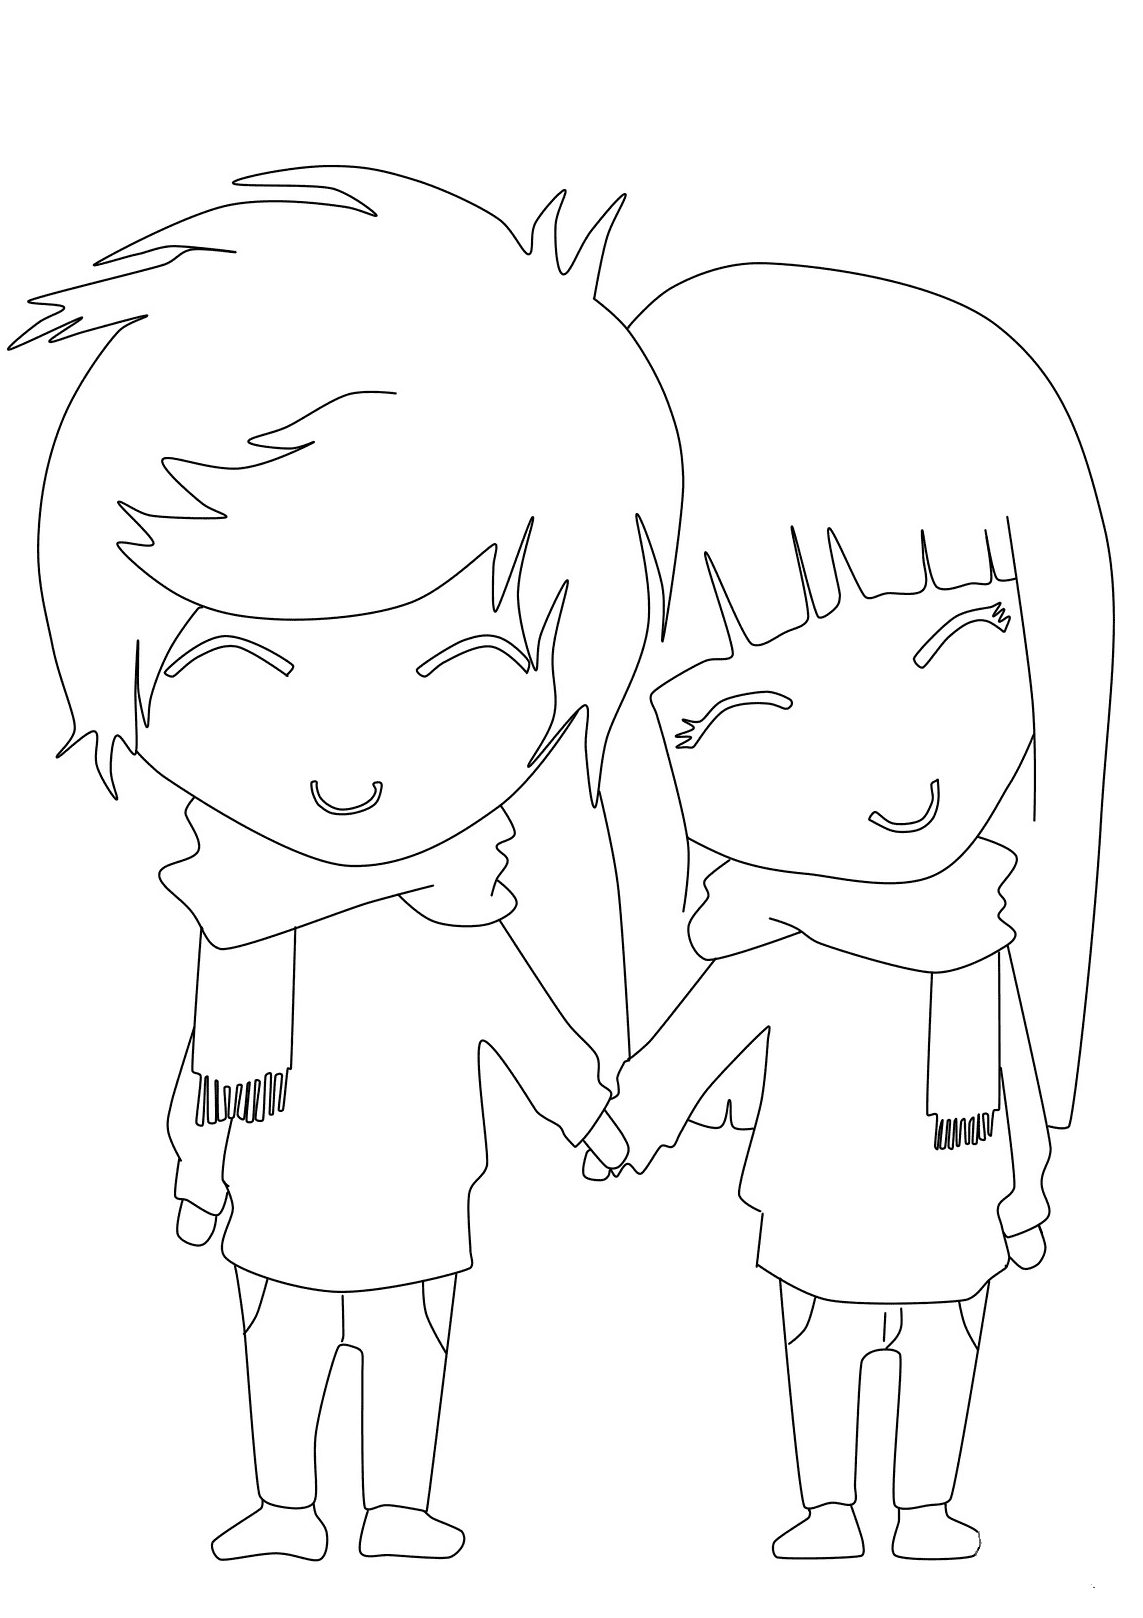 Free Printable Anime coloring pages